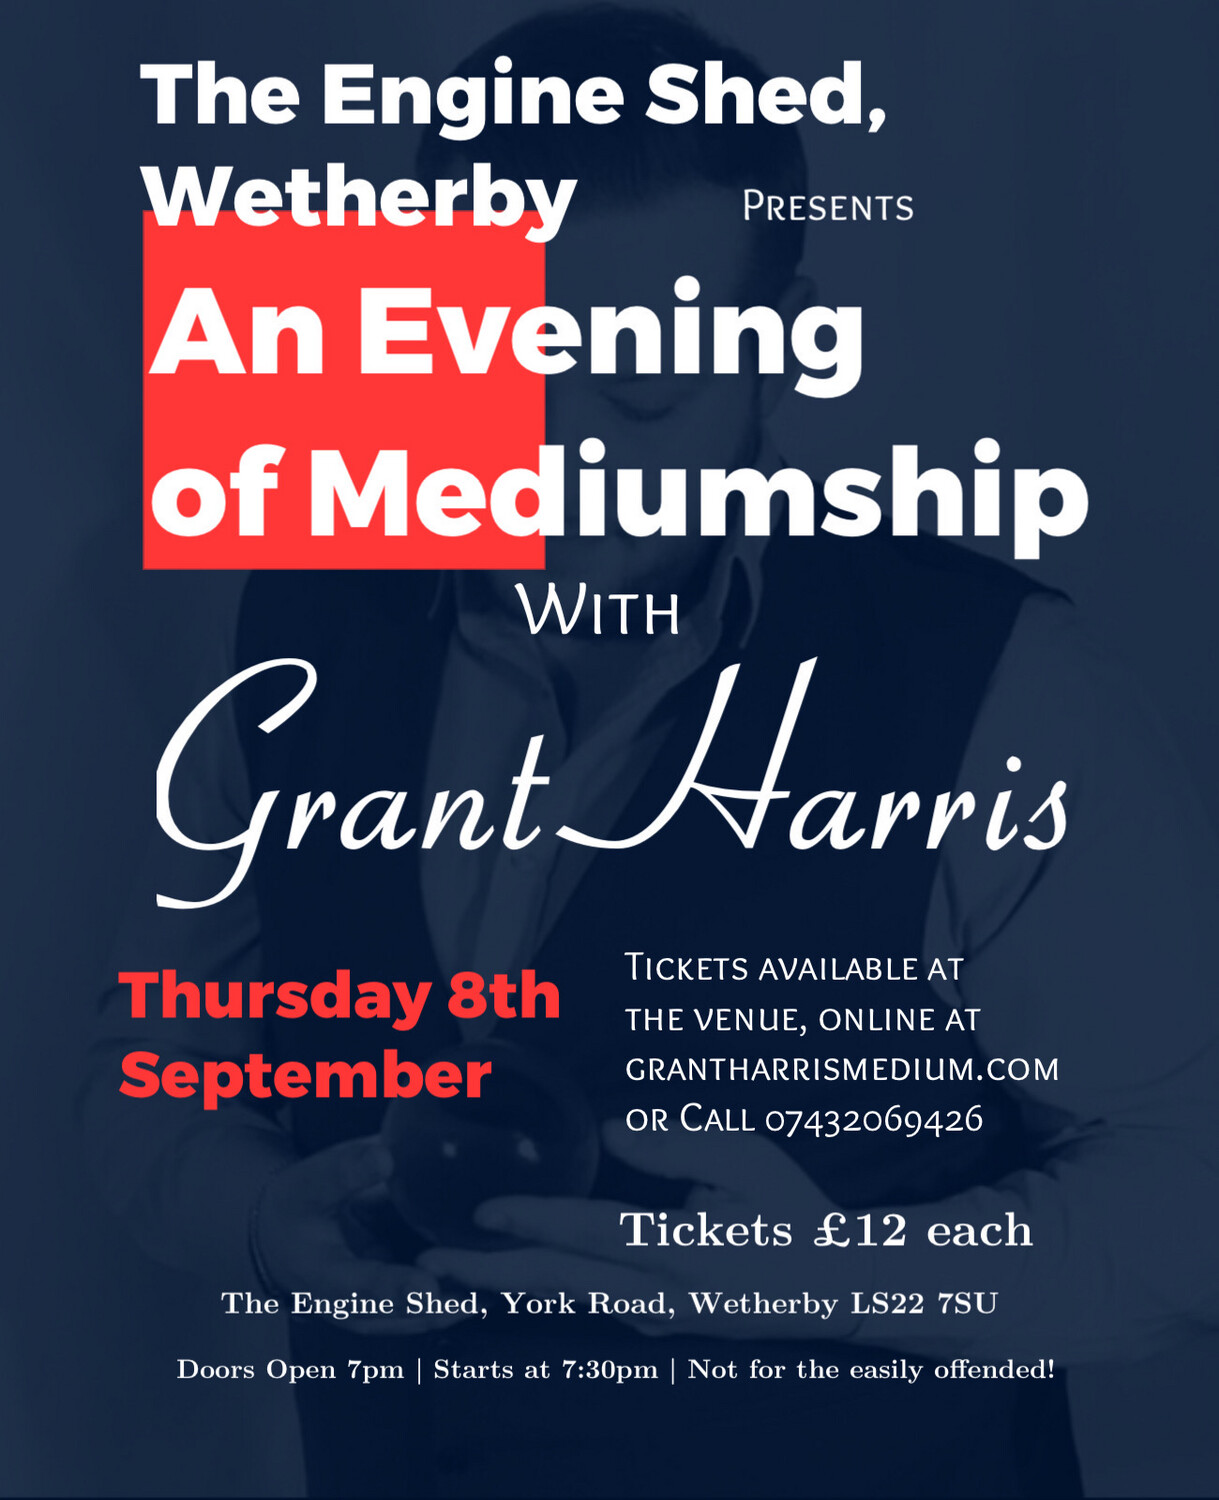 Evening of Mediumship, The Engine Shed, Wetherby, Thurs 8th September 2022